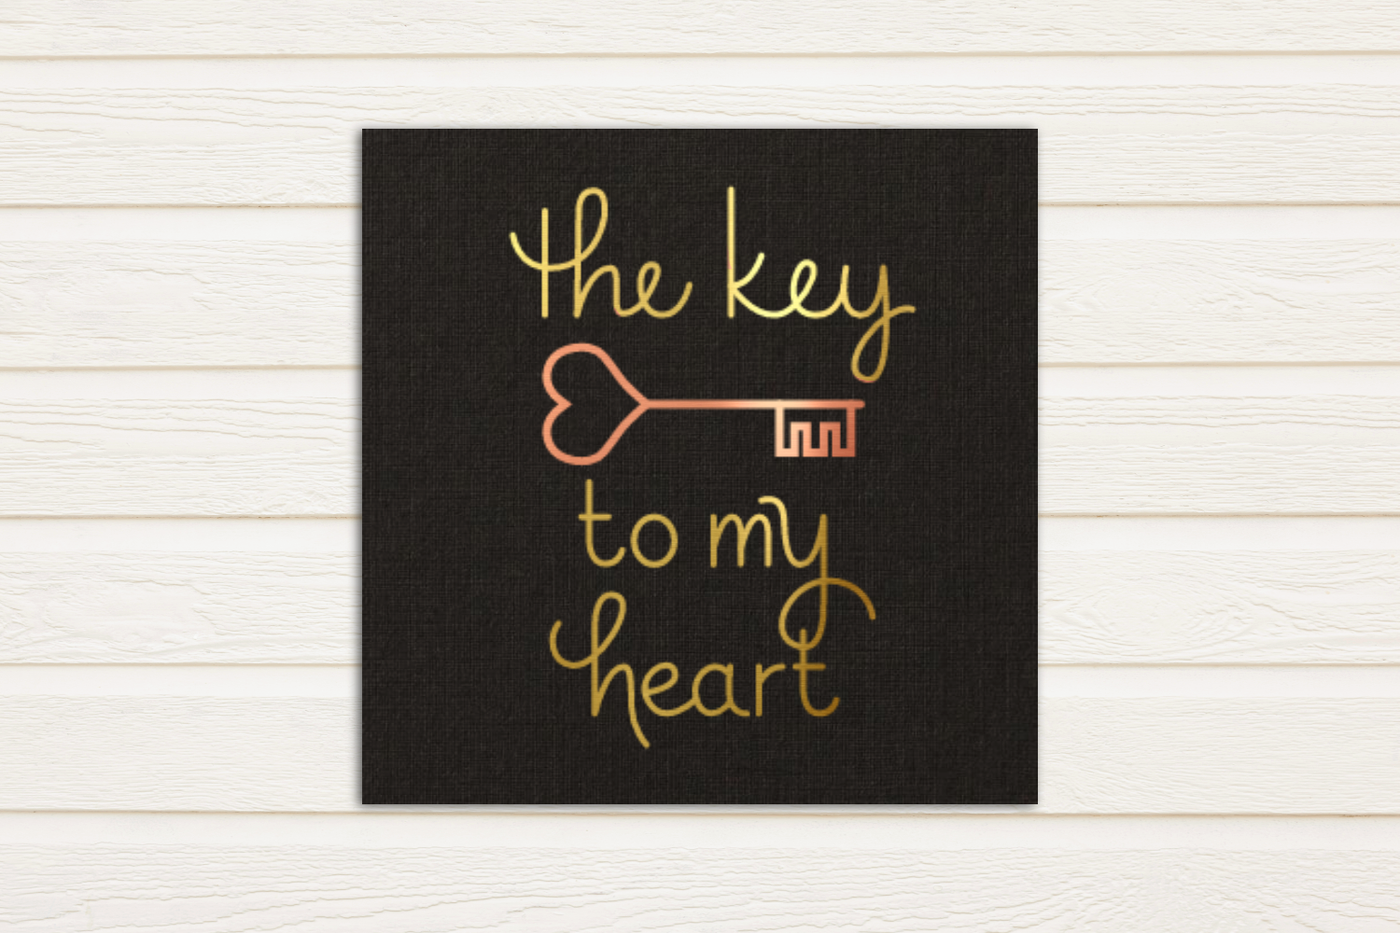 Single line sketch design that says "the key to my heart" with a heart shaped skeleton key. Done in gold and copper foil.